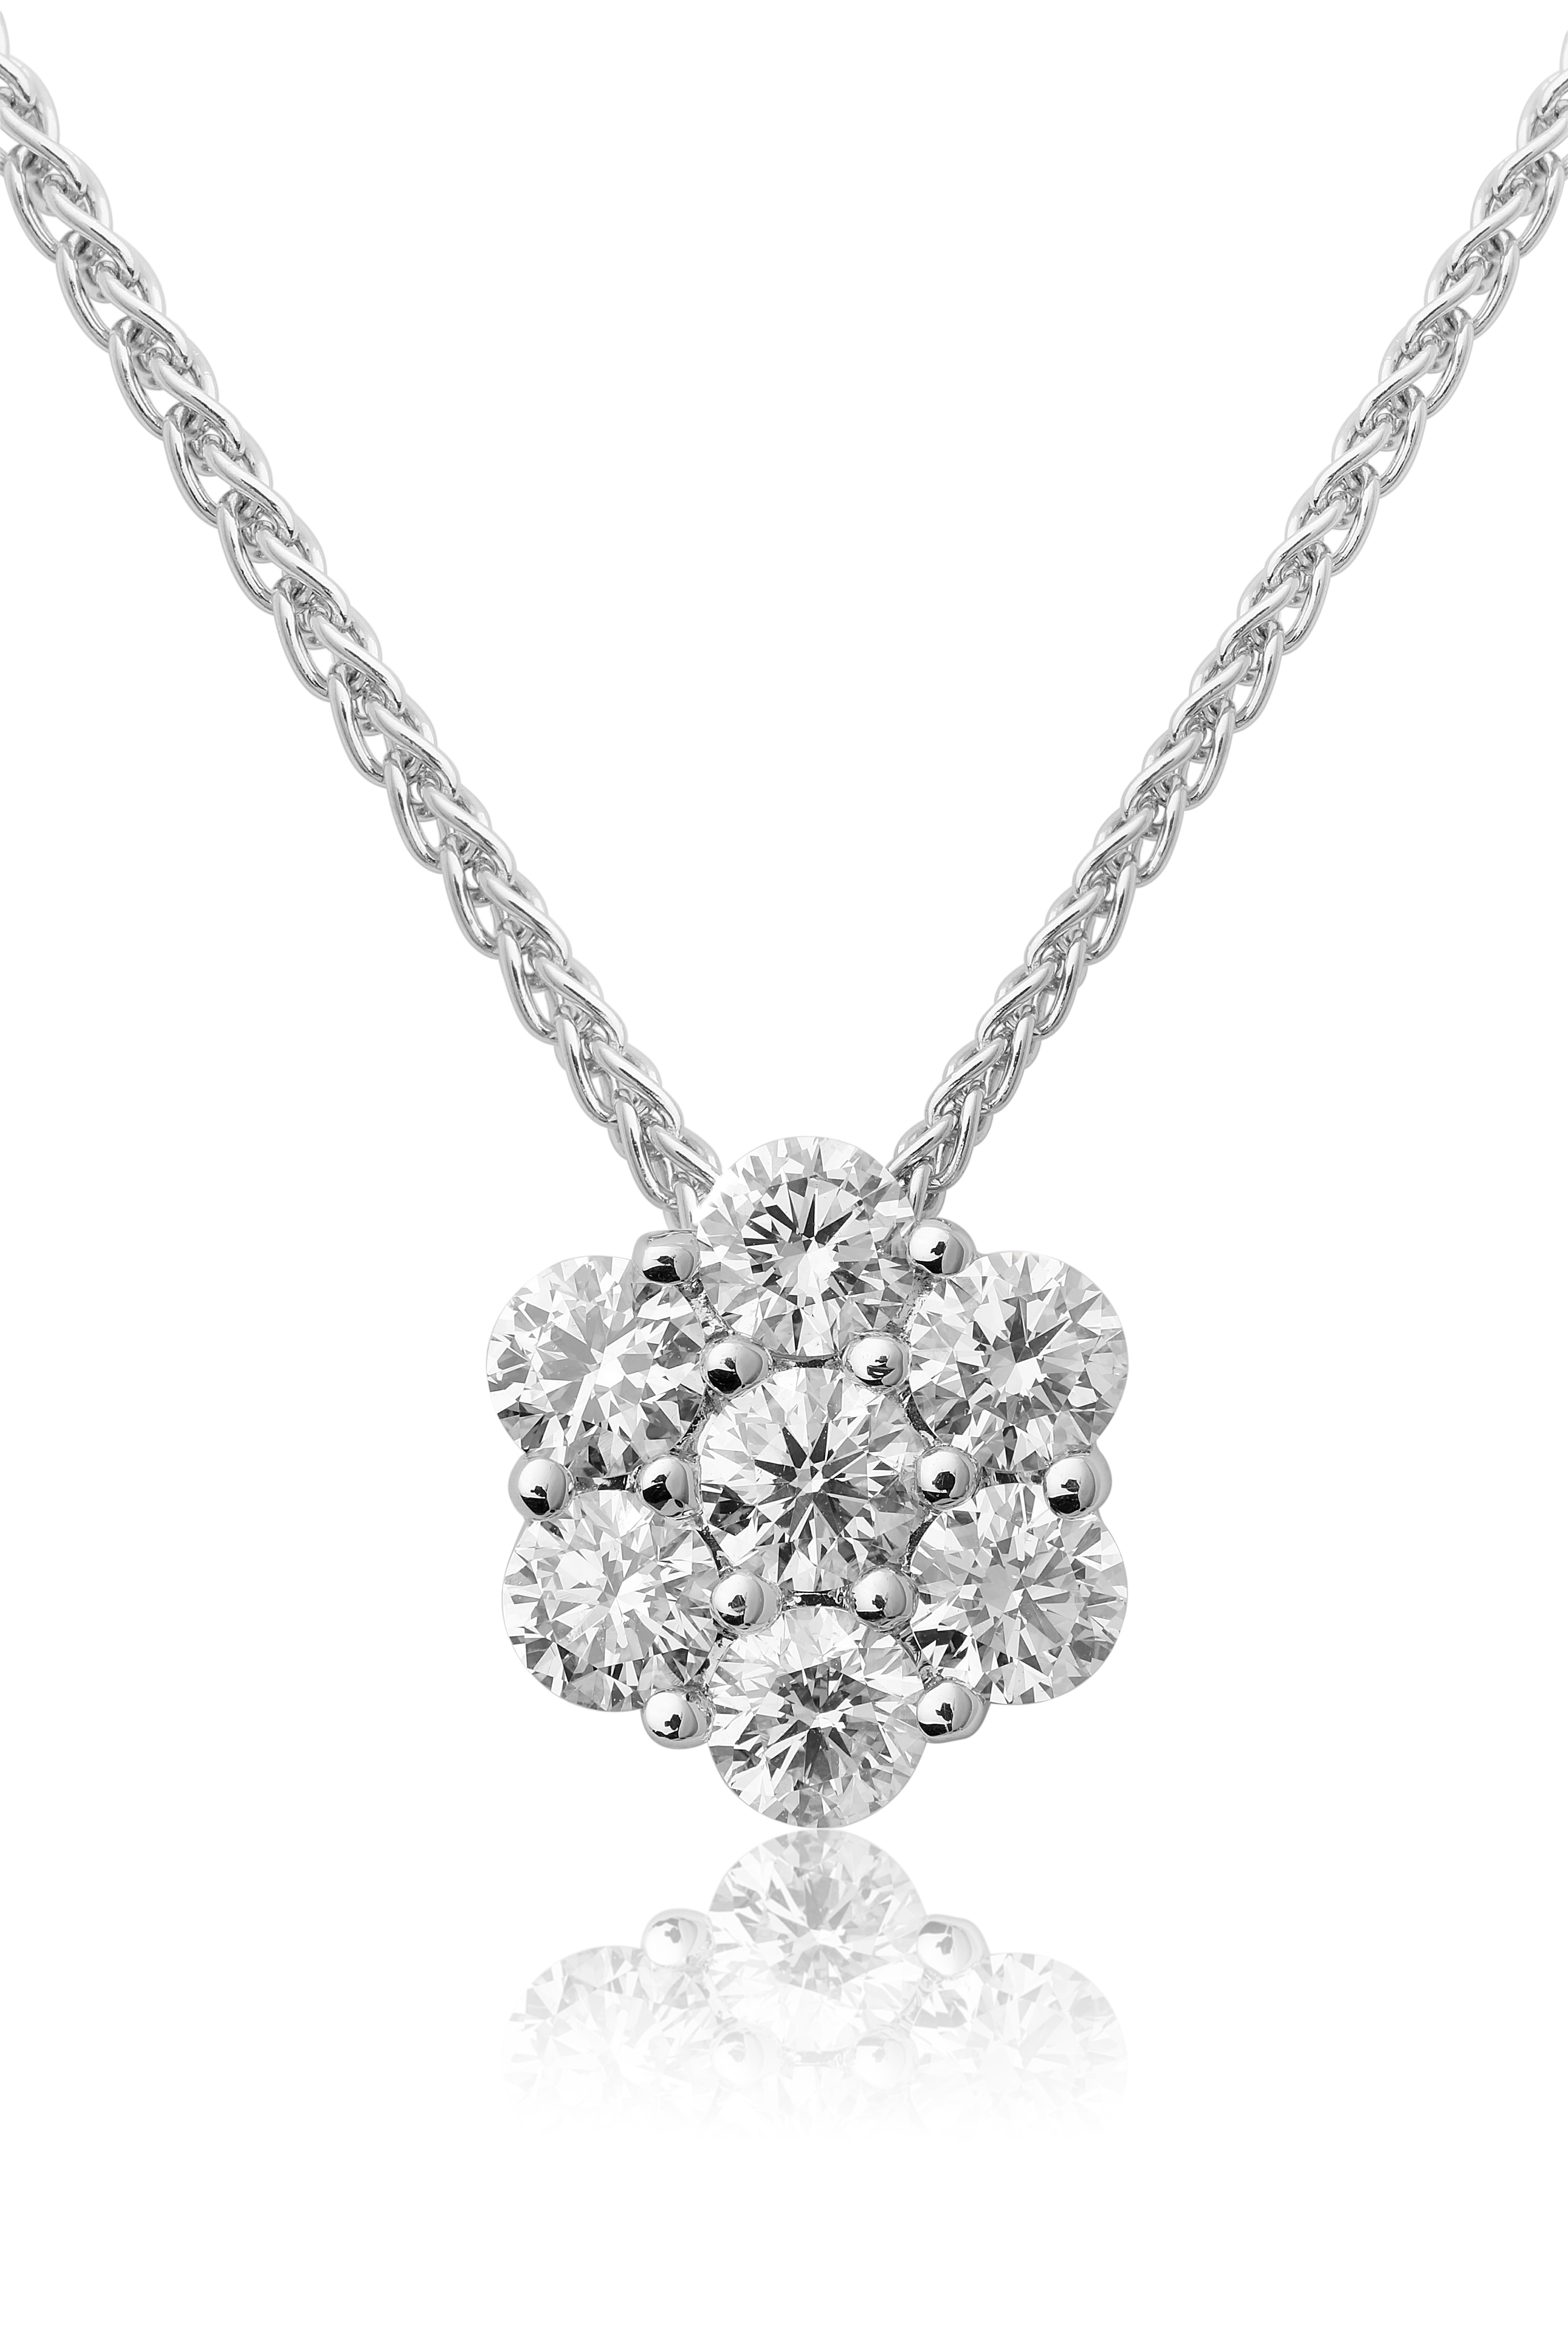 18K White Gold Floral Cluster Diamond Necklace